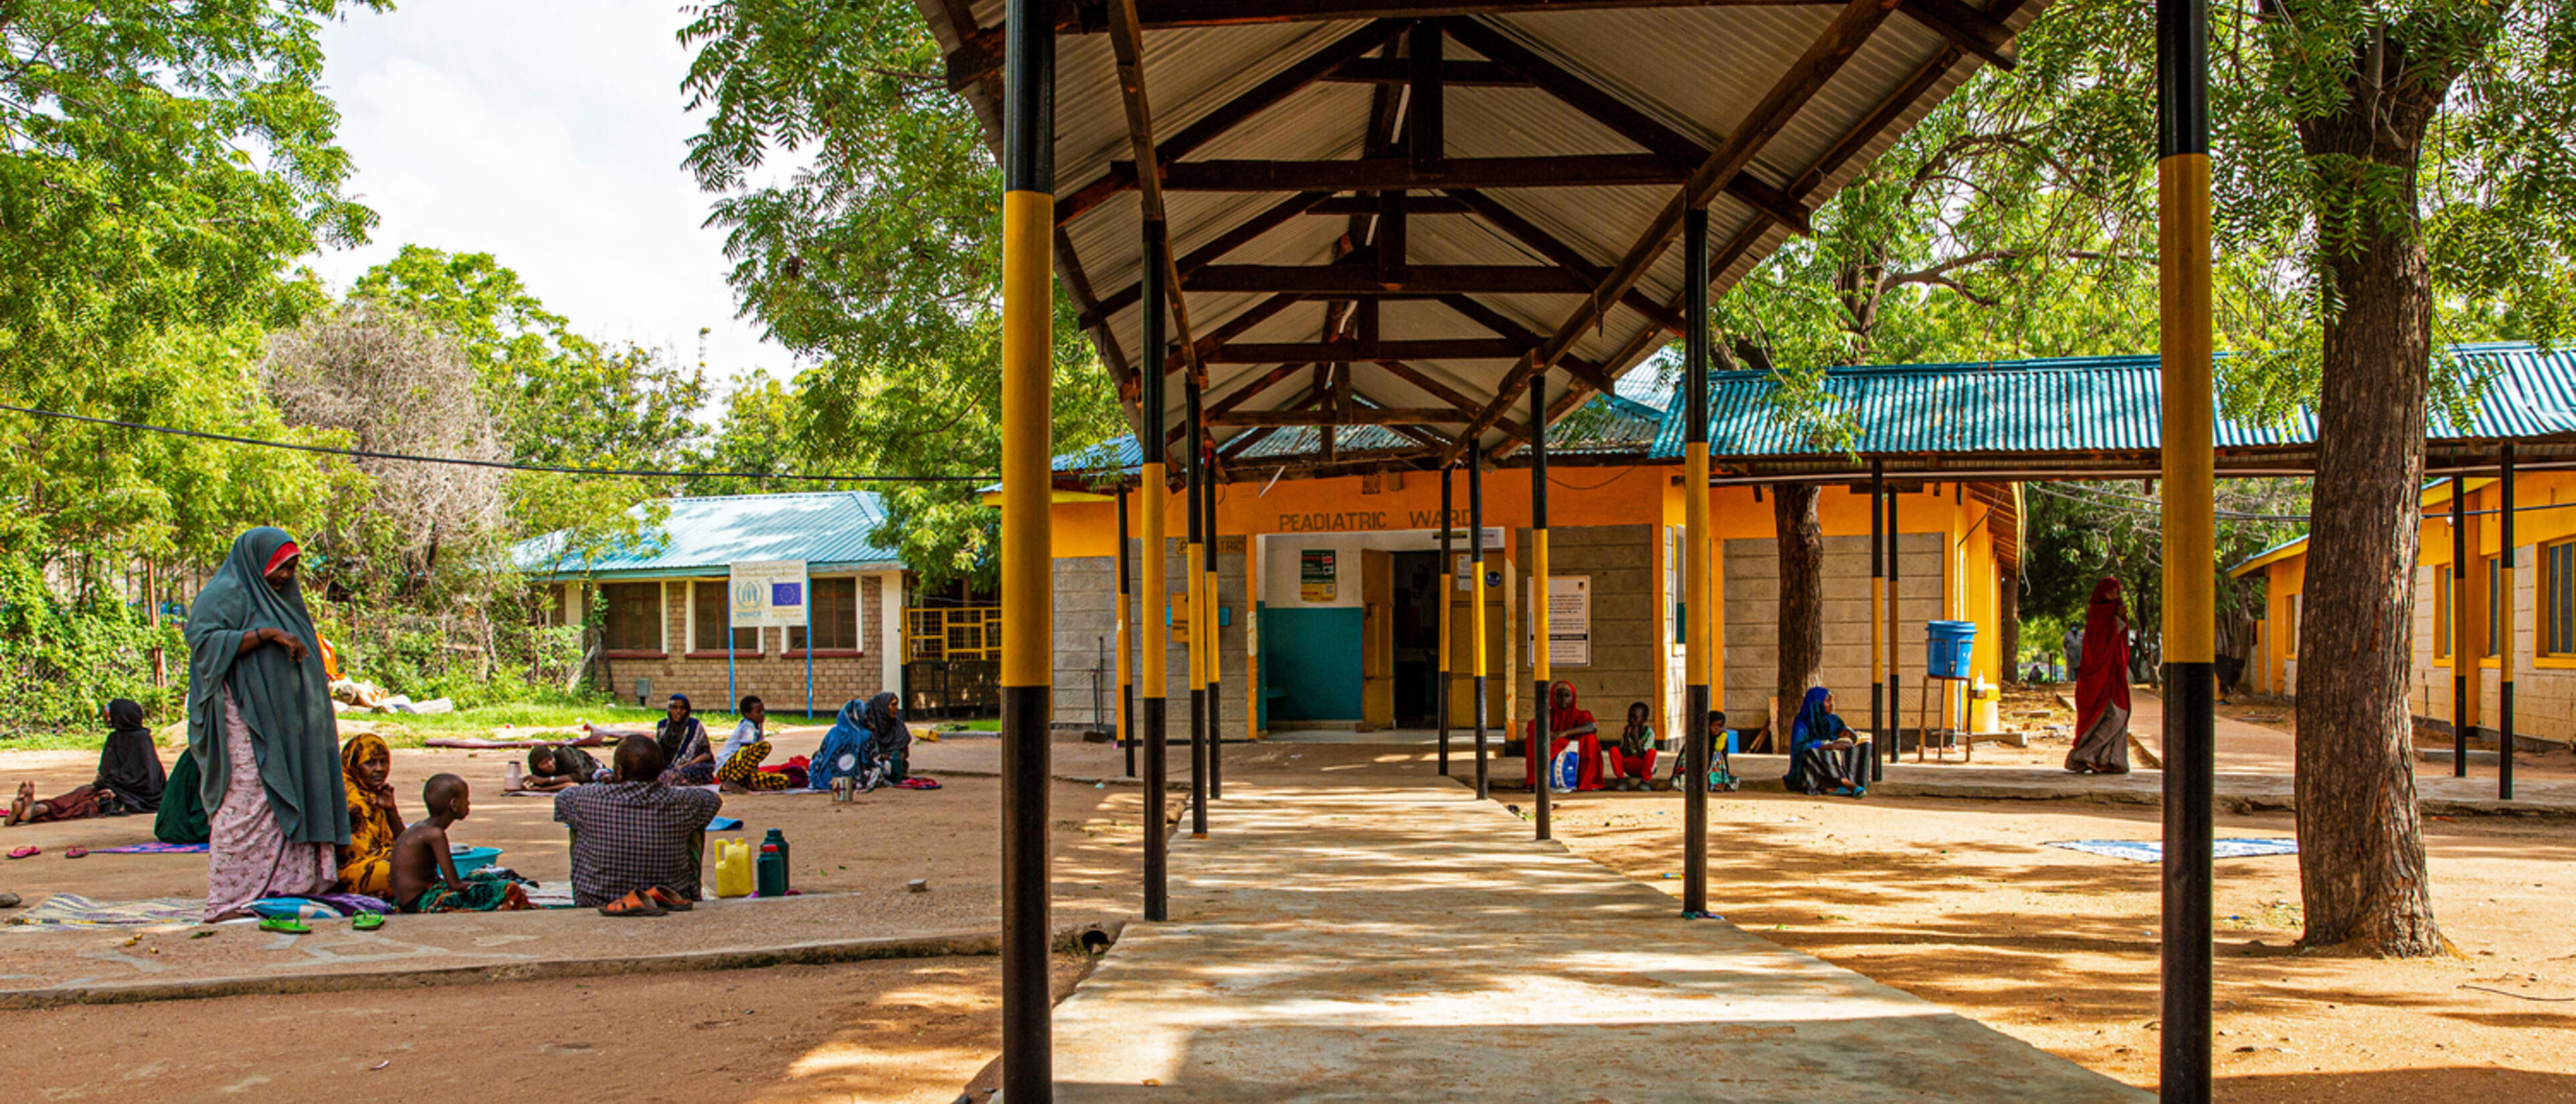 Outside the female ward at the IRC’s Hagadera Refugee Camp Hospital, Kenya (part of the Dadaab complex). Families of patients walk out during visiting hours.